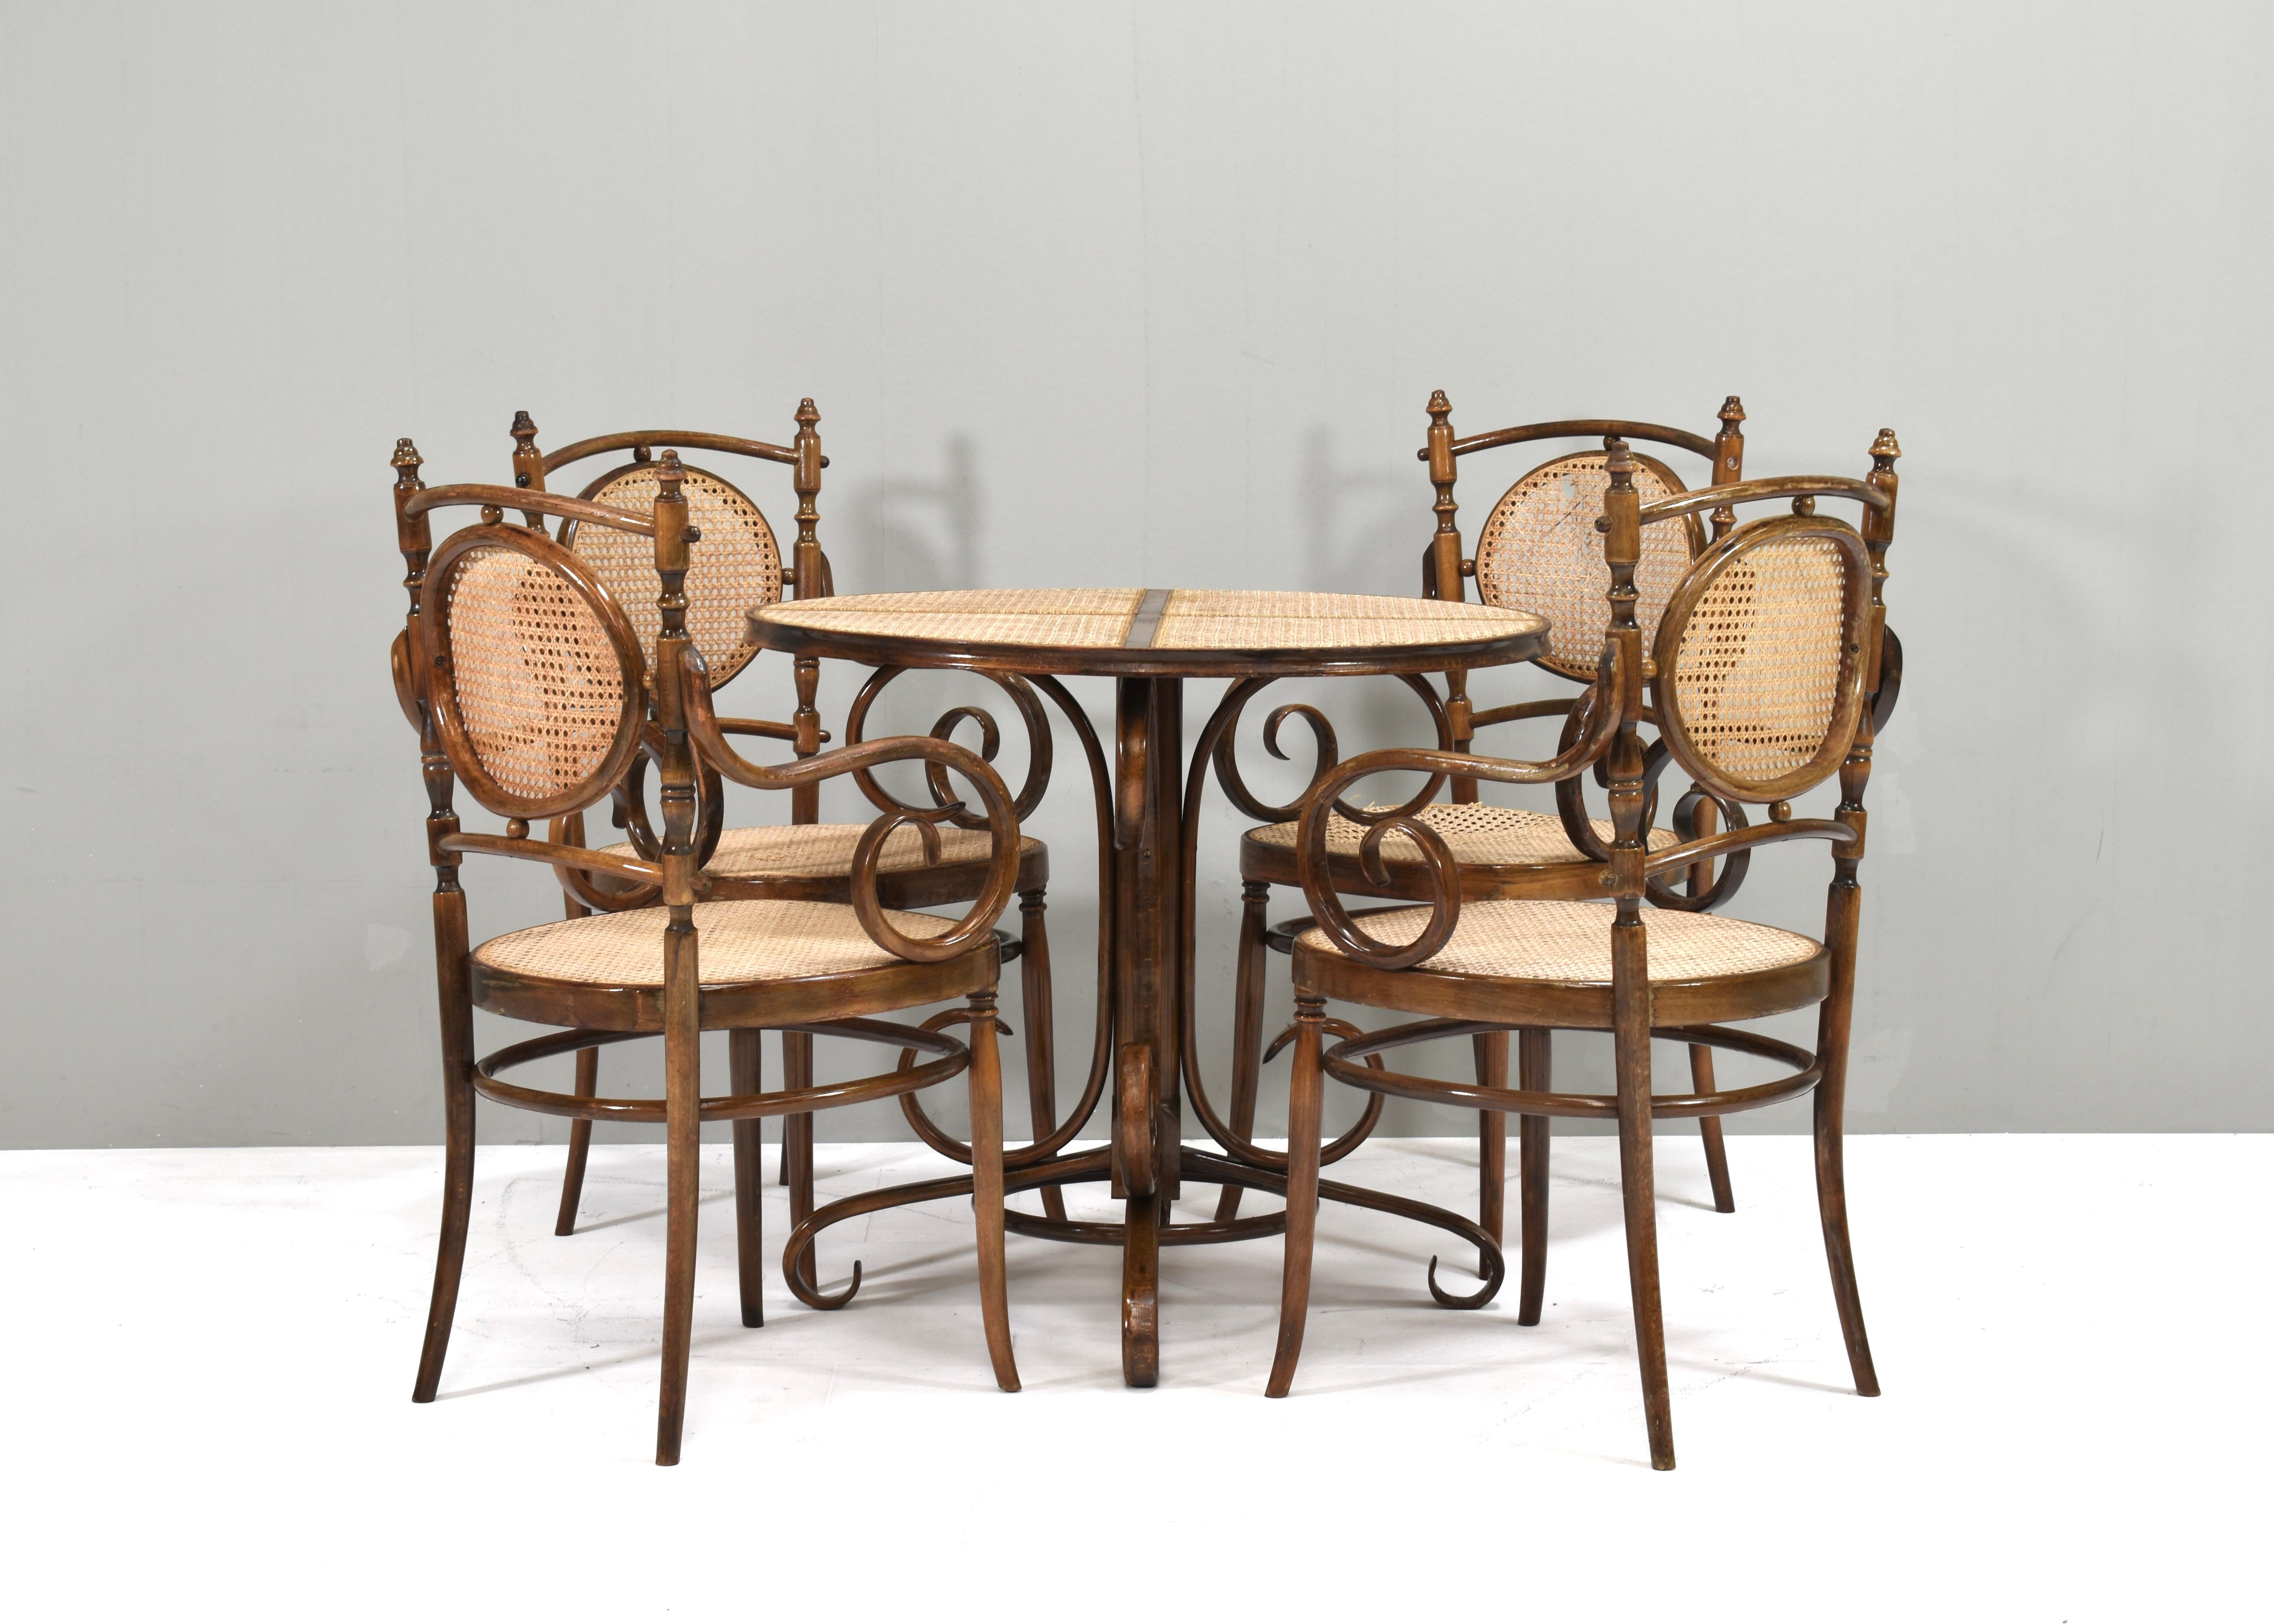 No. 17 dining set in bentwood and cane 'long john' chairs and table designed by Michael Thonet. Originally designed in the 1860s and produced by Thonet in the 20th century by multiple factories.
Size:
chairs: 57x49x96.5 seat height 46 Arm height 67